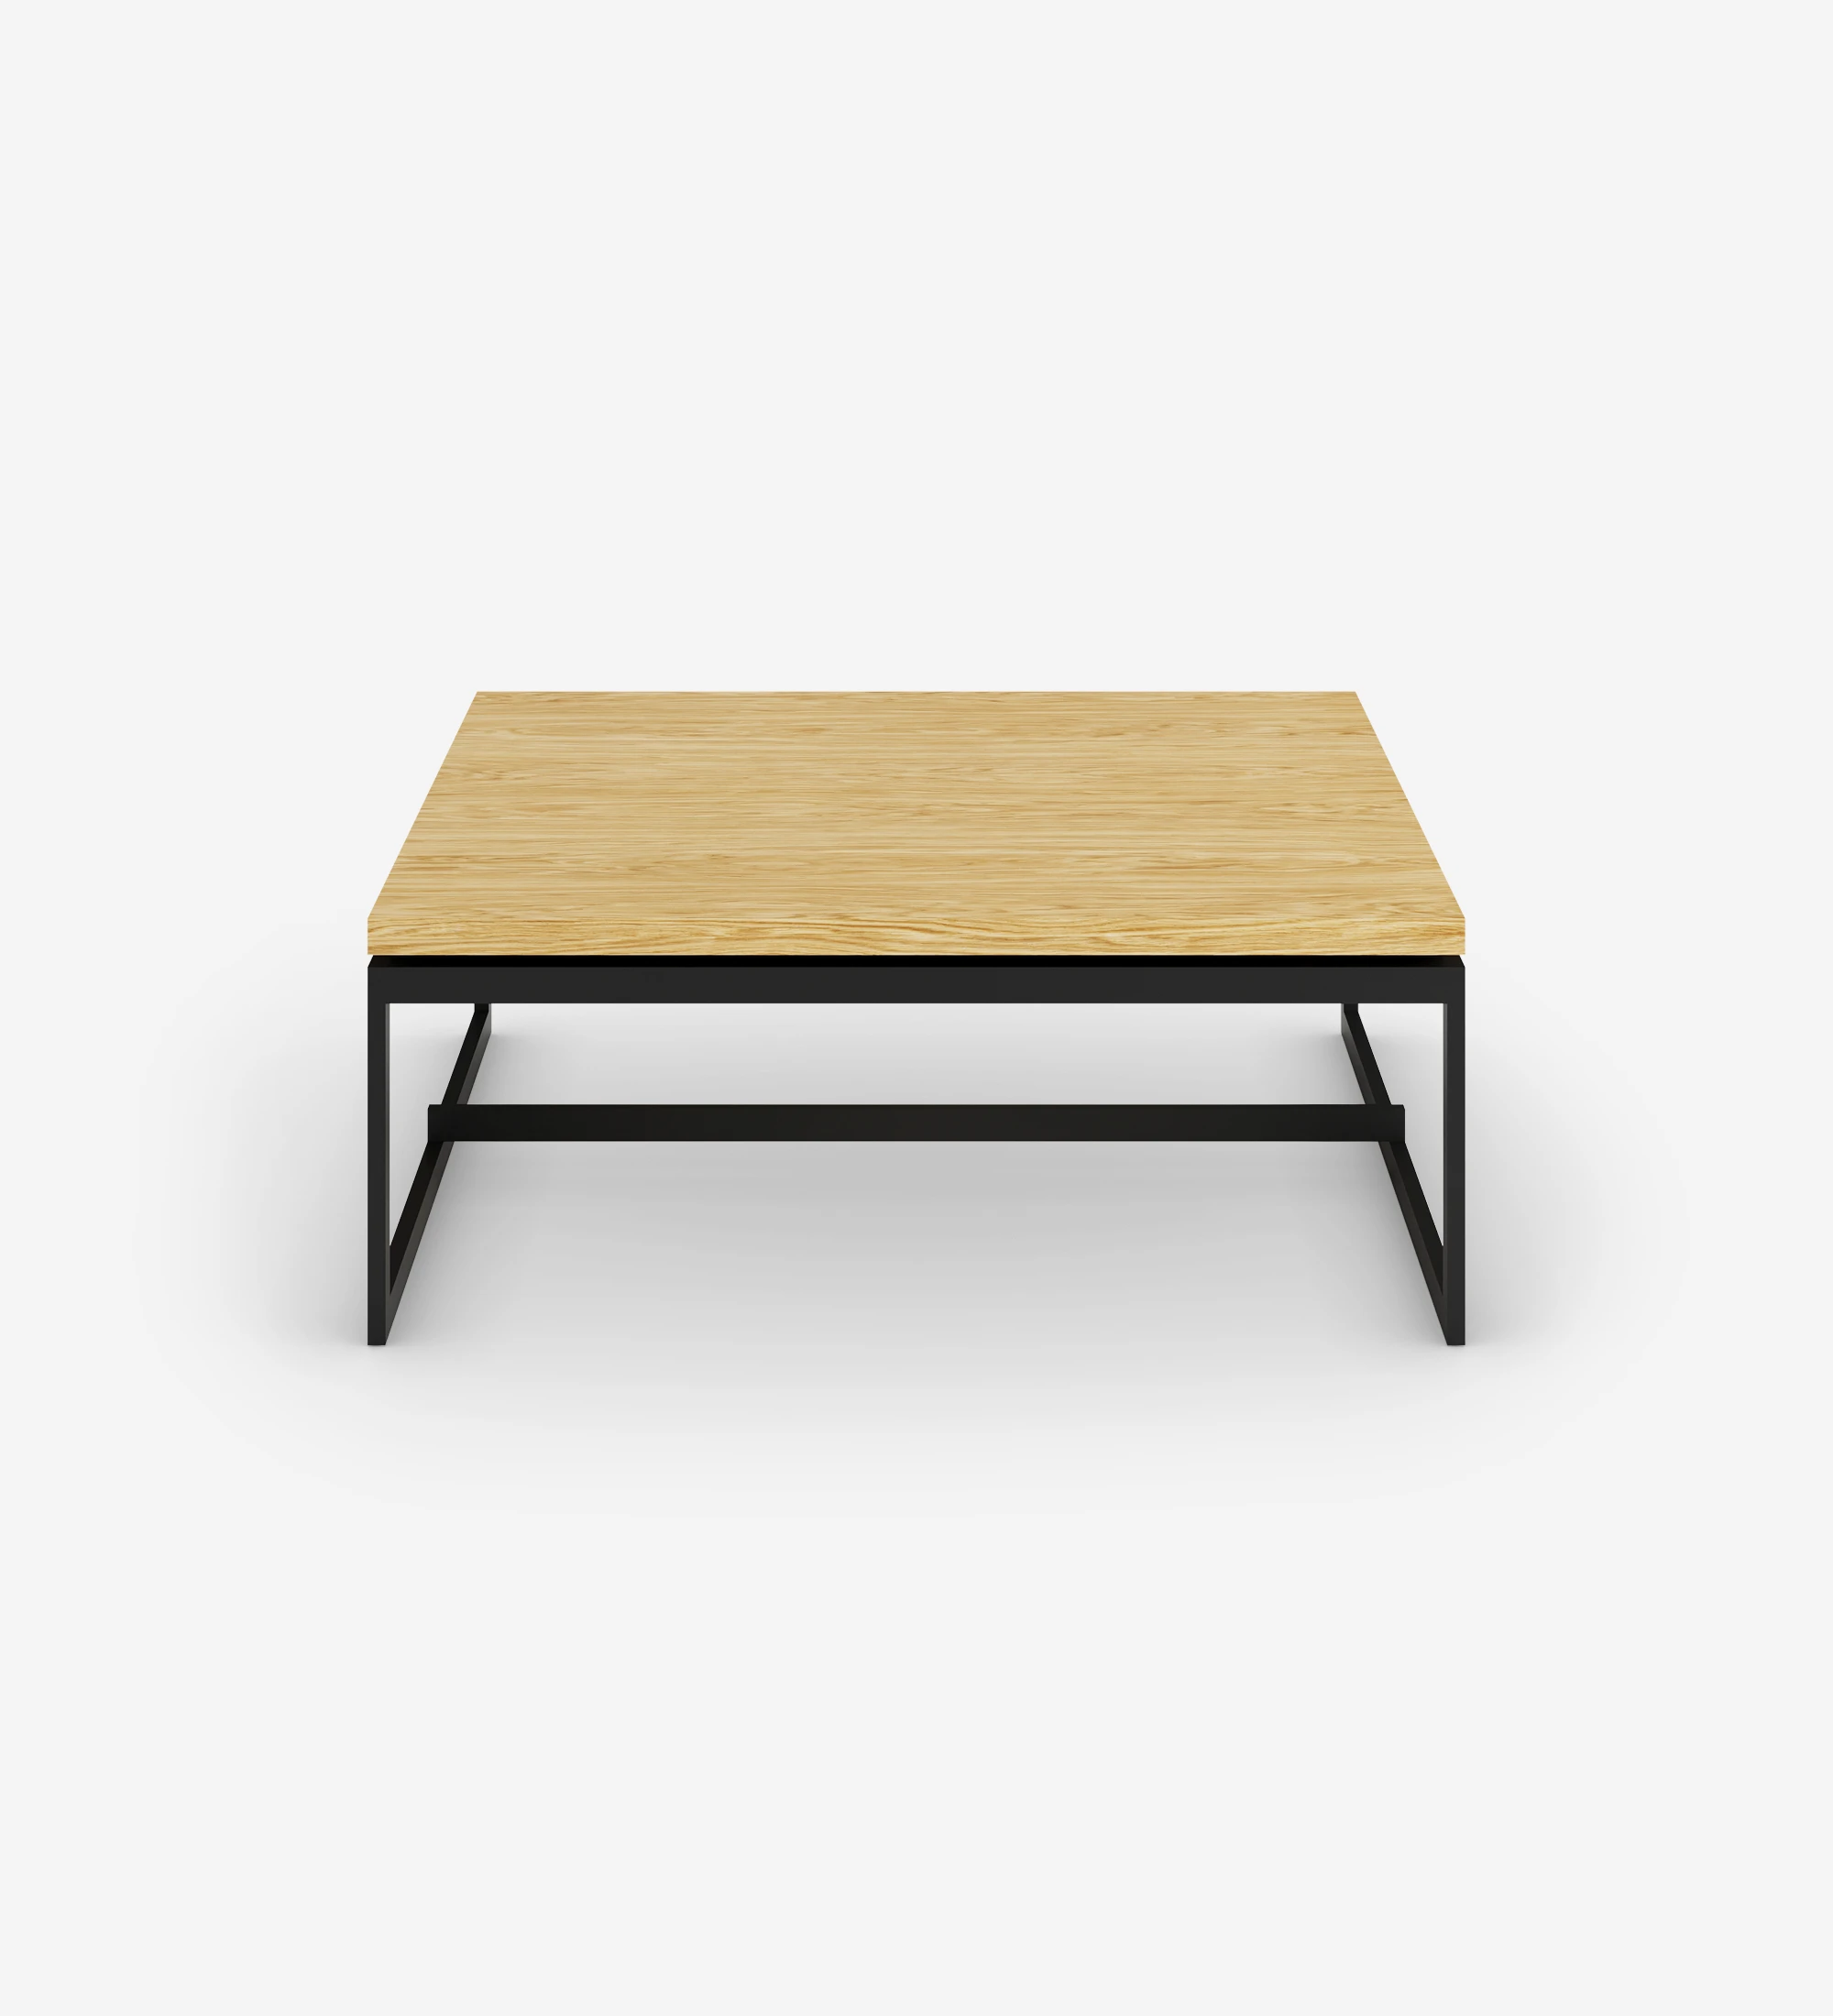 Chicago square center table, natural oak top, black lacquered metal feet, 90 x 90 cm.